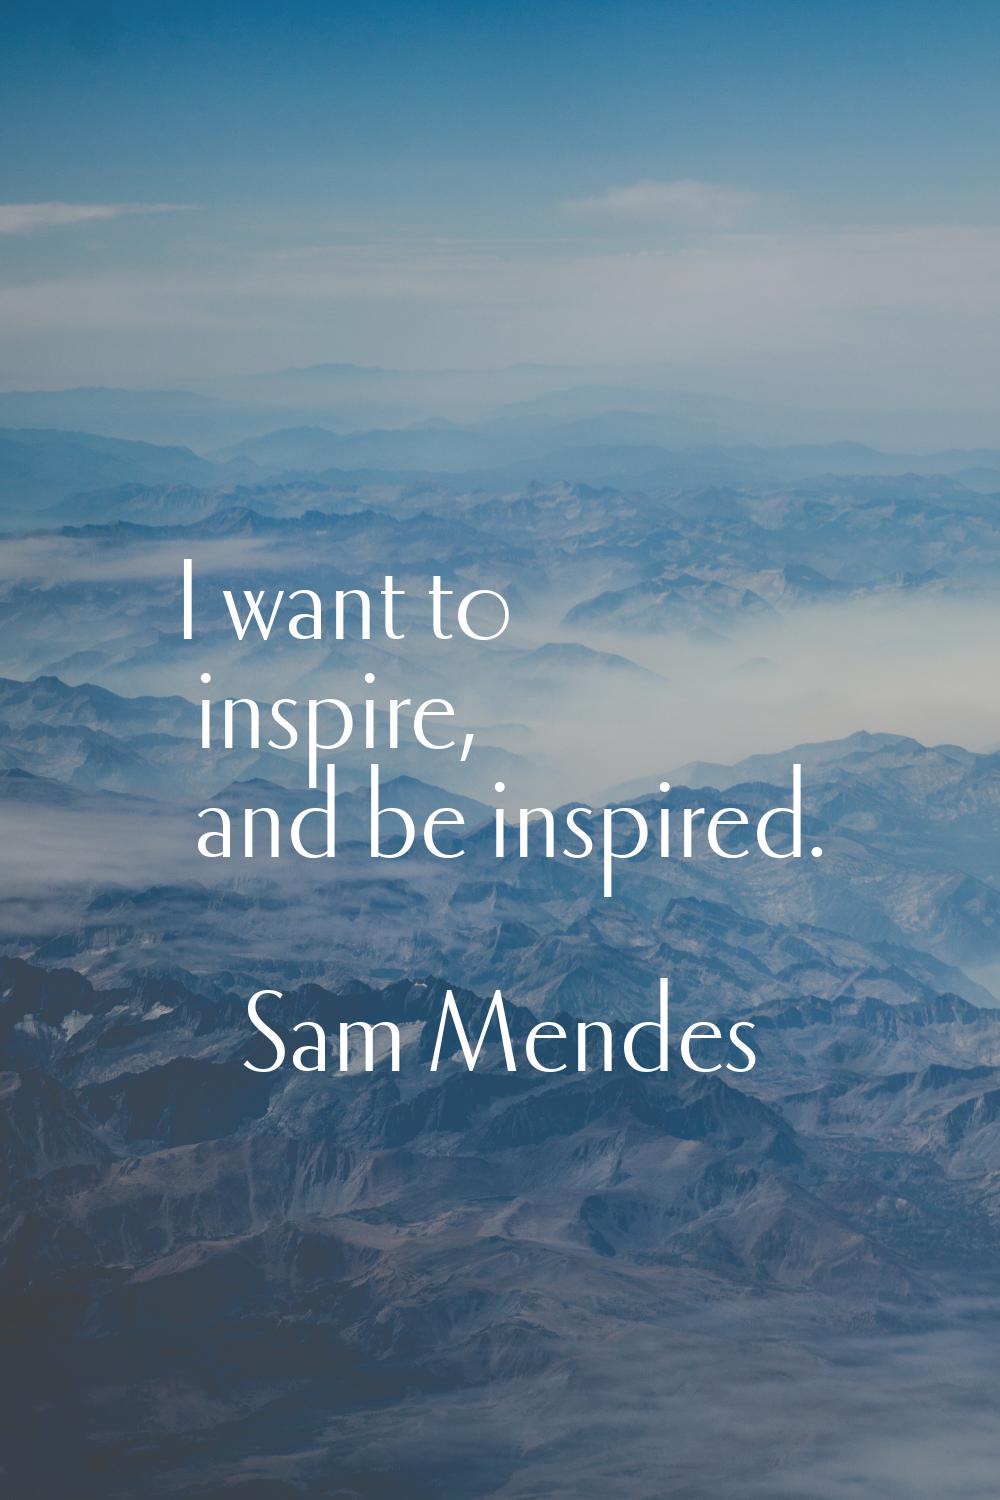 I want to inspire, and be inspired.